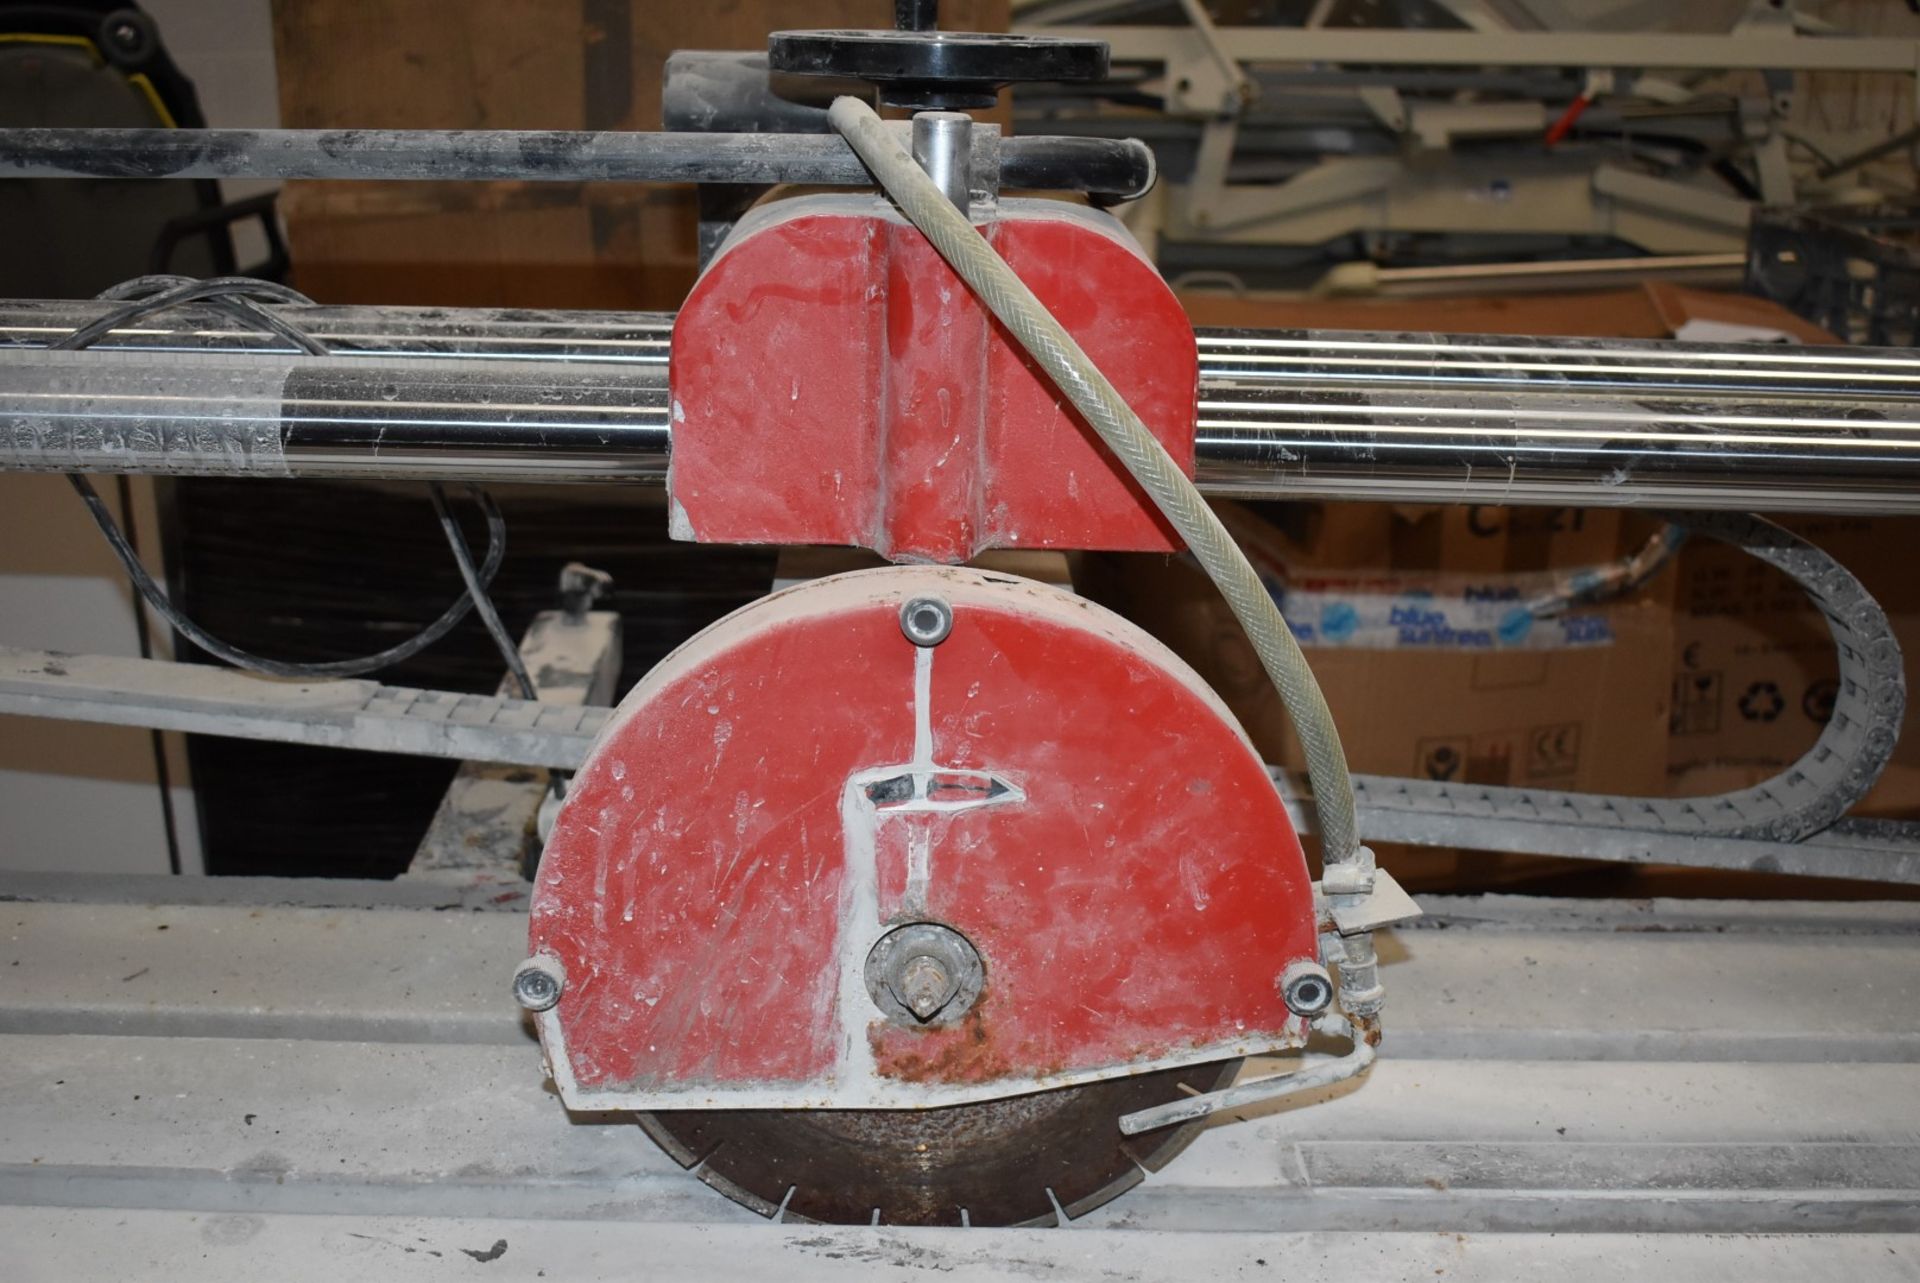 1 x Stone Cutter With 12 Inch Blade and Converyer - Includes Spares Parts Such as Spare Motor - Image 15 of 17